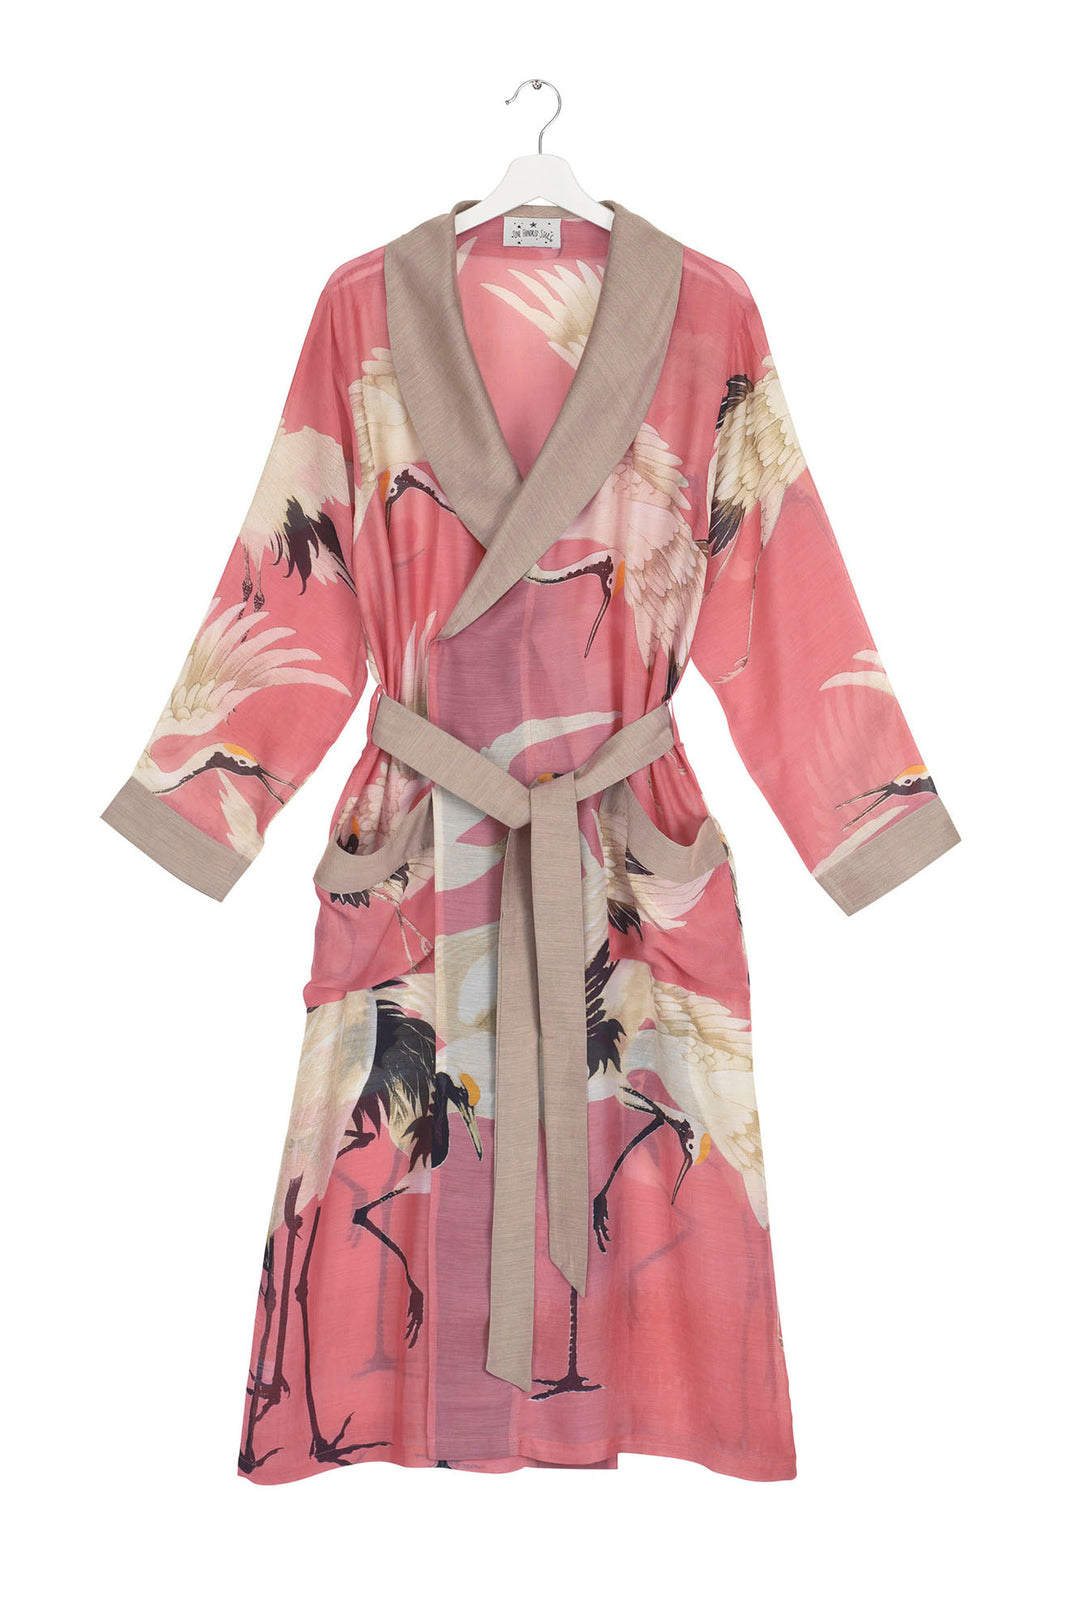 One Hundred Stars - Stork Crane Lipstick Pink Gown, perfect for loungewear in the house or dressing up and tied at the back with your favourite outfit.